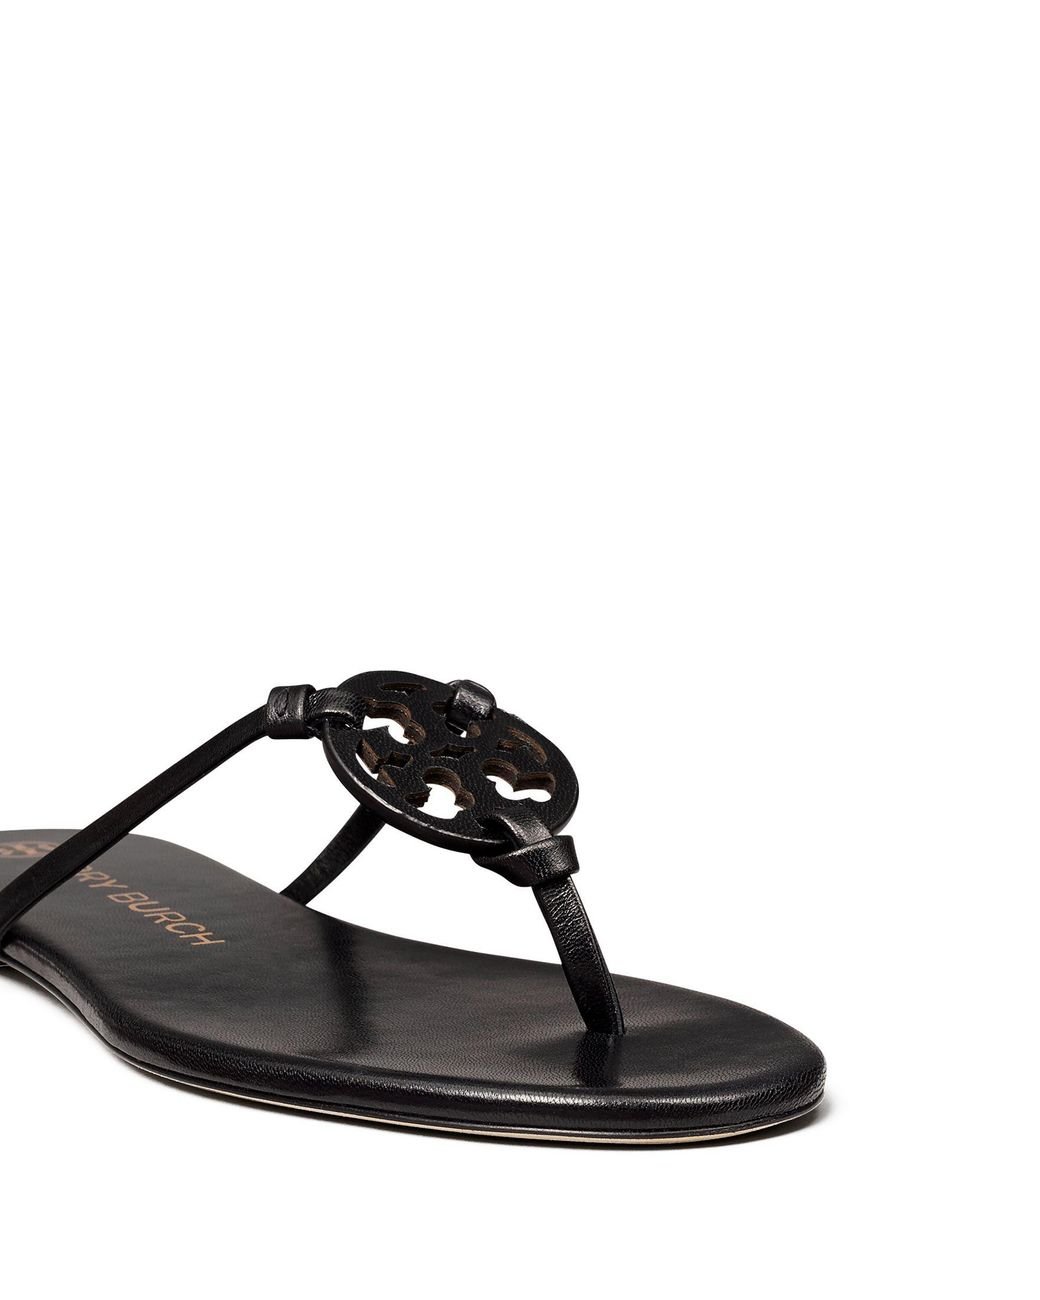 Tory Burch Miller Knotted Sandal in Black | Lyst